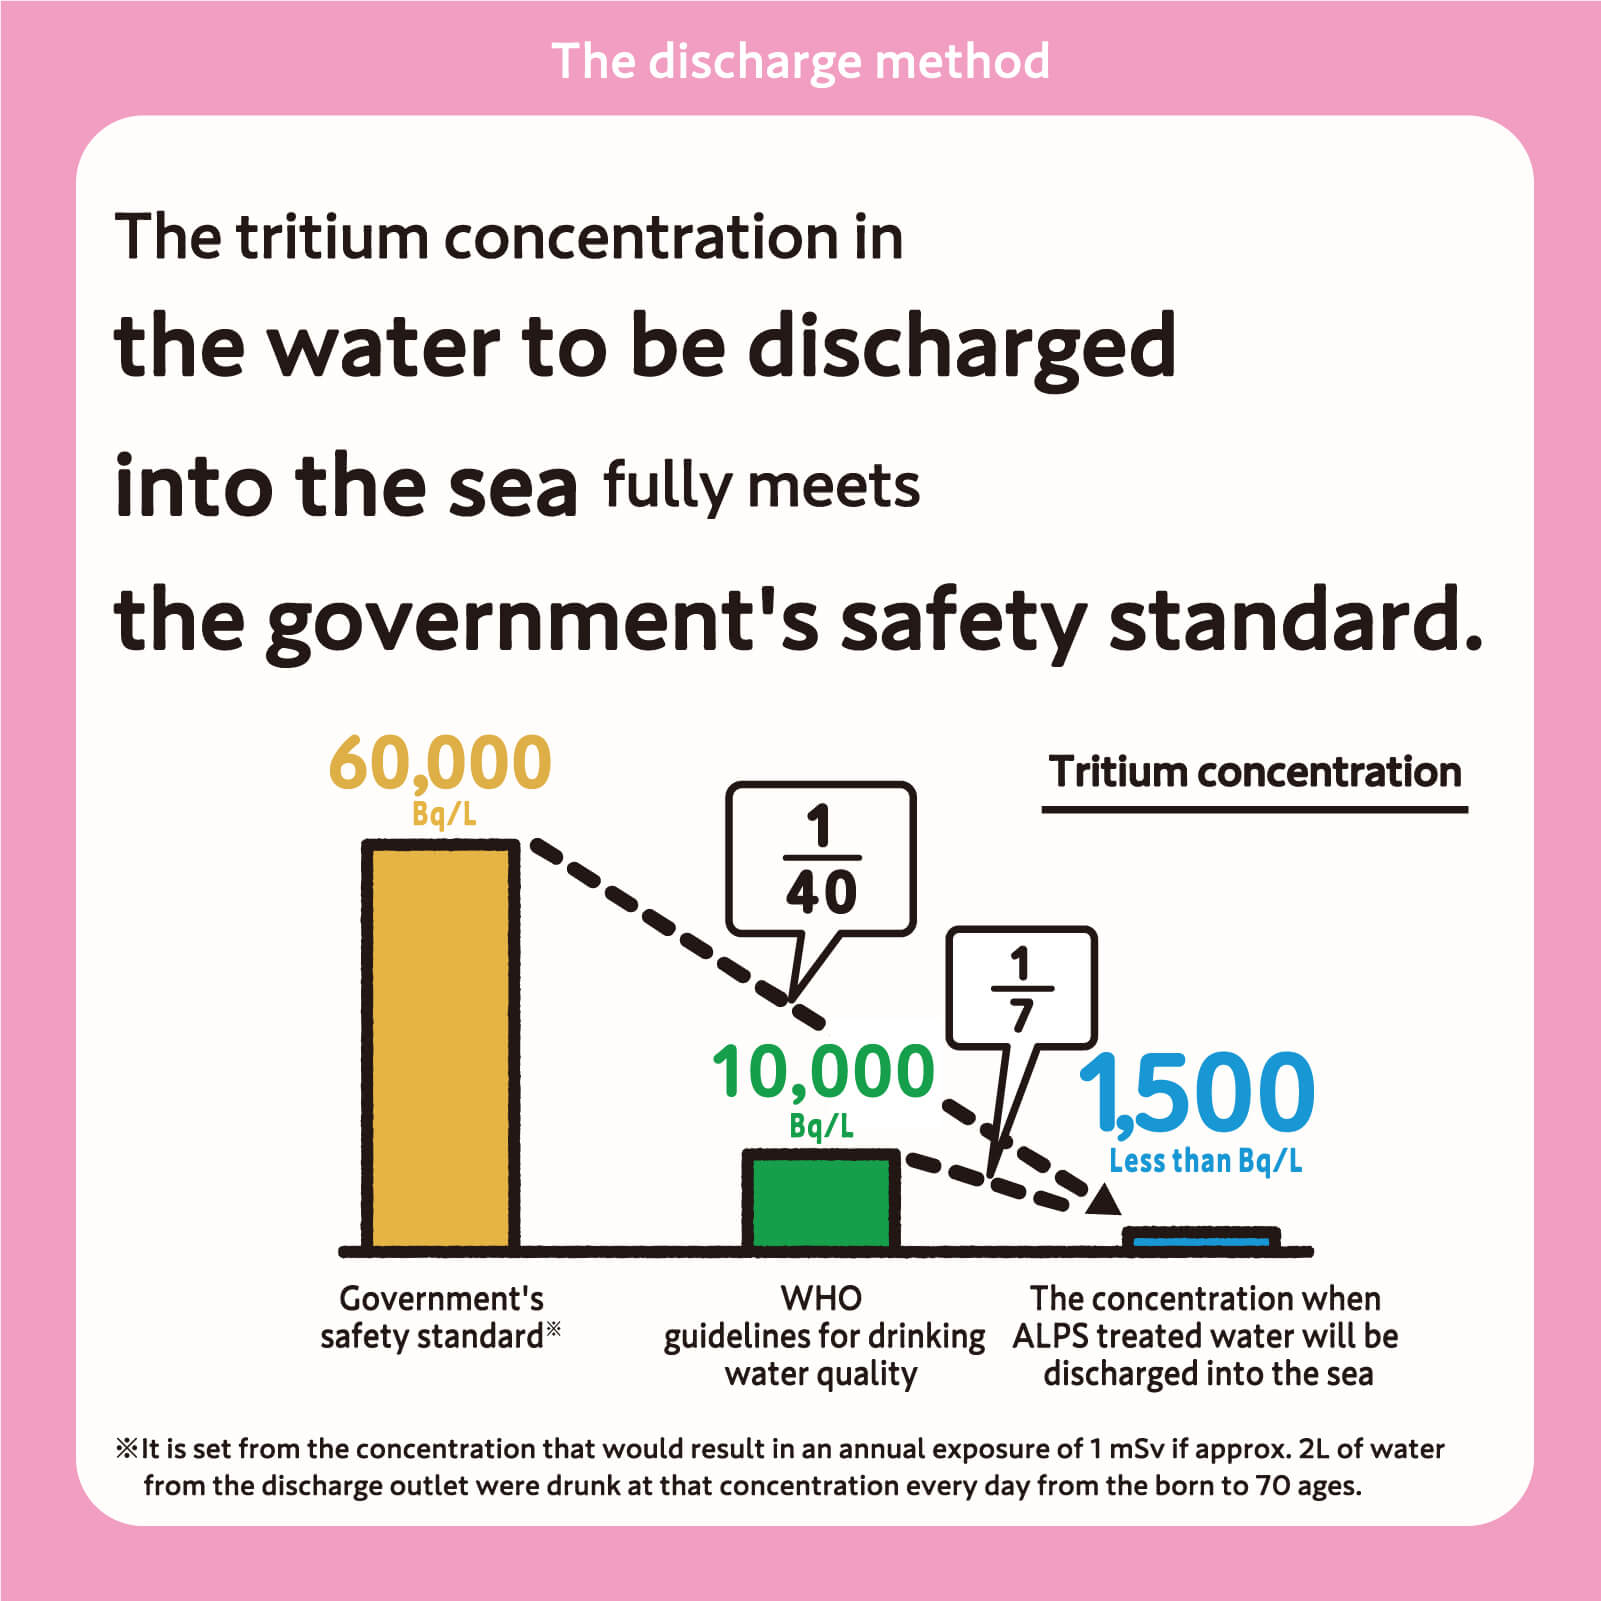 The tritium concentration in the water to be discharged into the sea fully meets the government's safety standard.